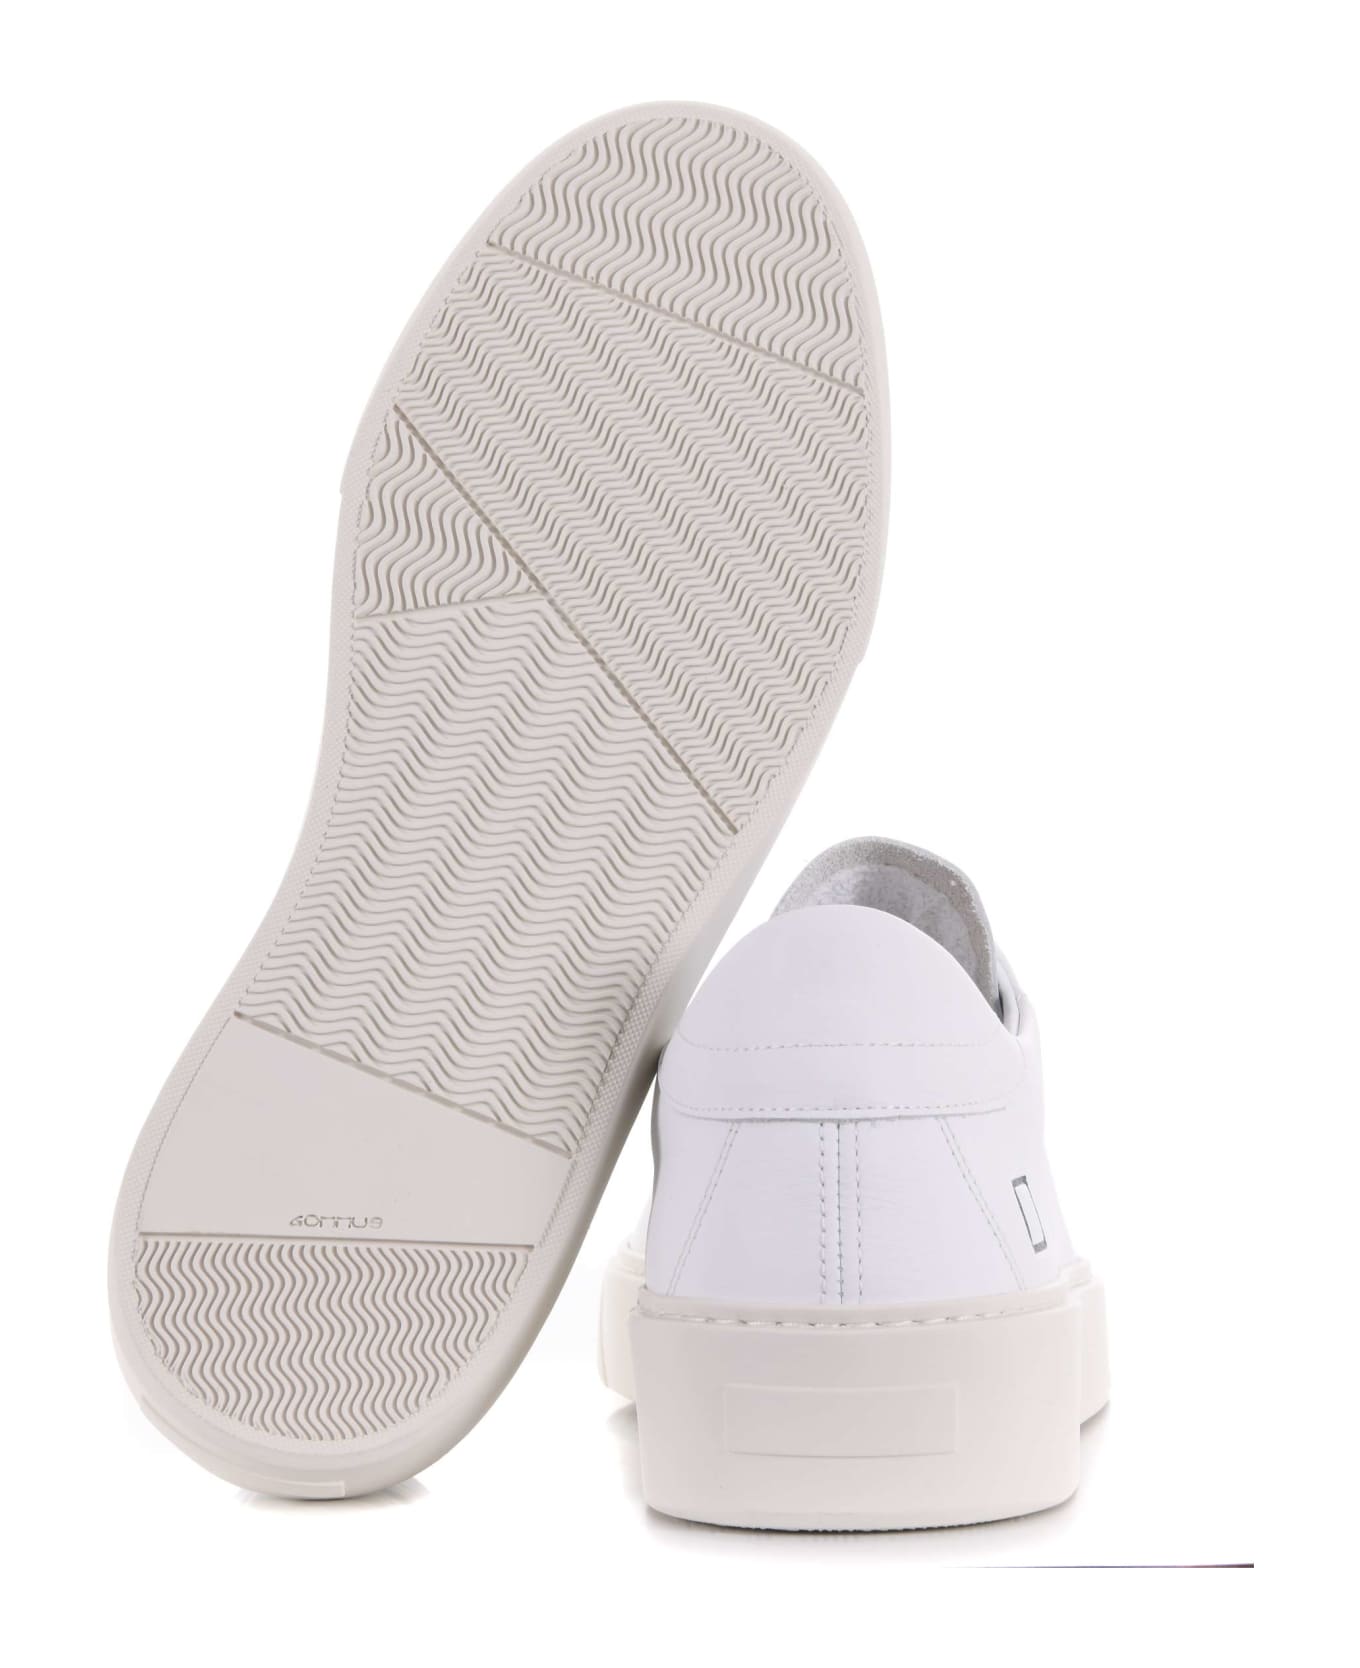 D.A.T.E. Men's Sneakers "sonica Calf" In Leather - Bianco スニーカー